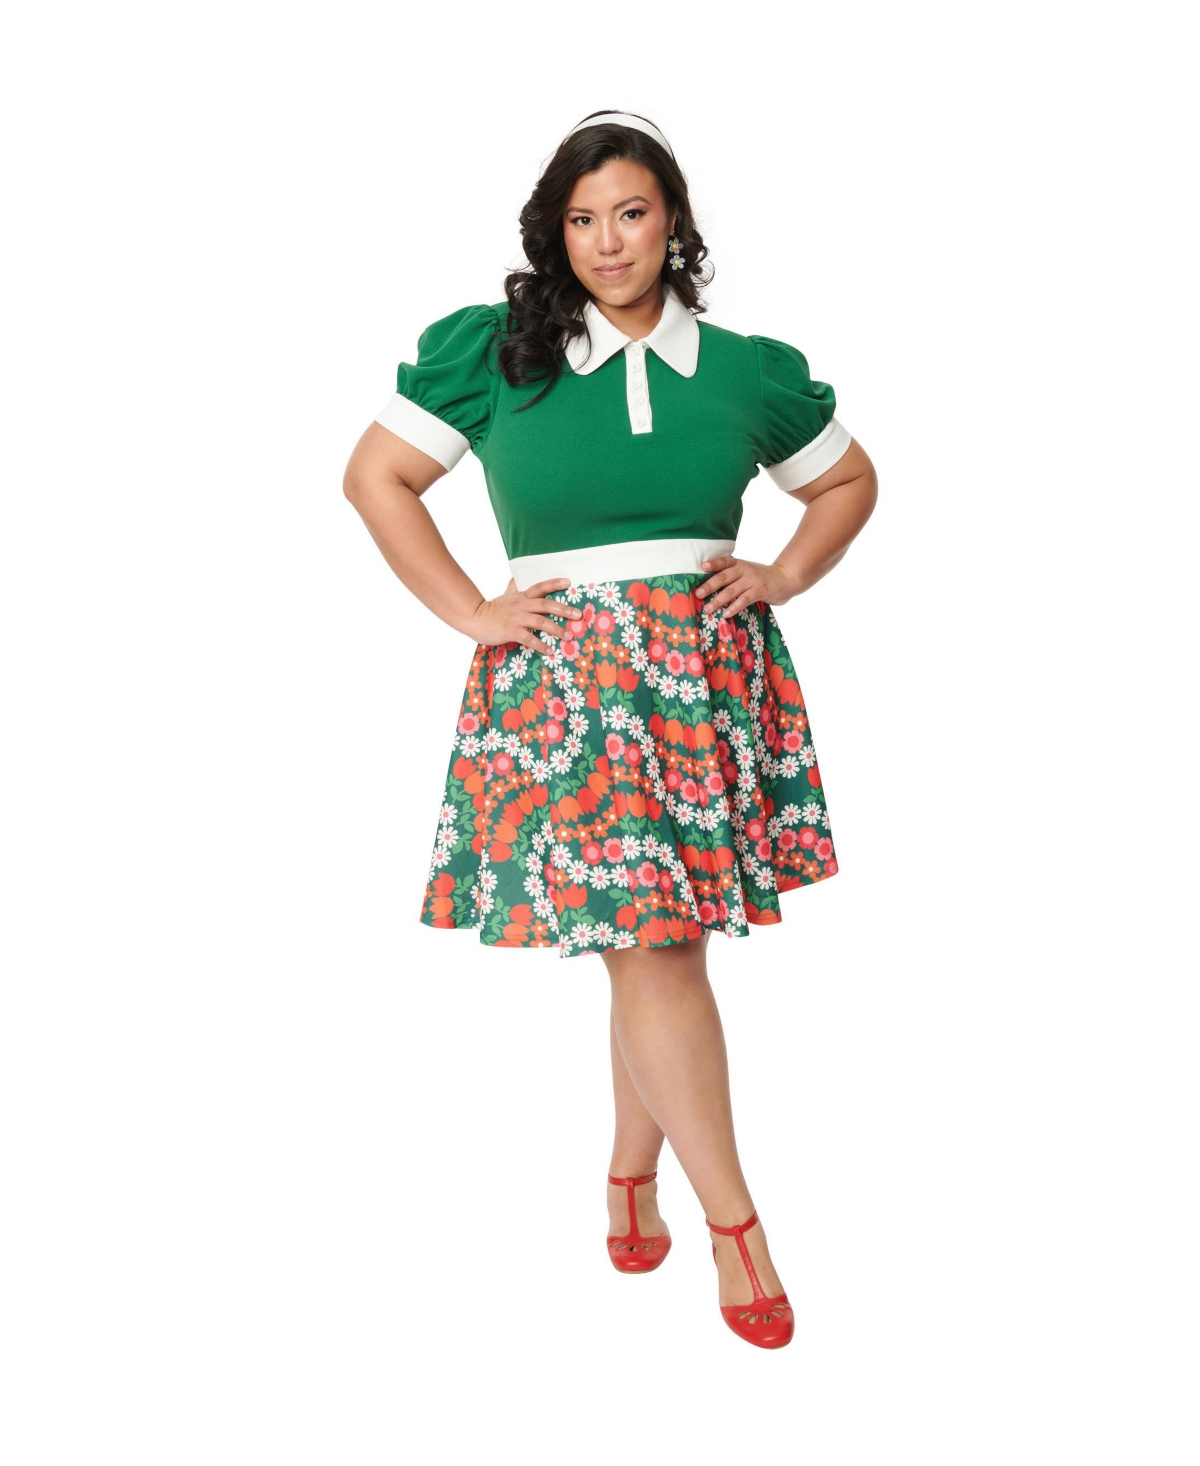 Plus Size Short Puff Sleeve Collared Fit & Flare Knit Dress - Green/daisy chain print